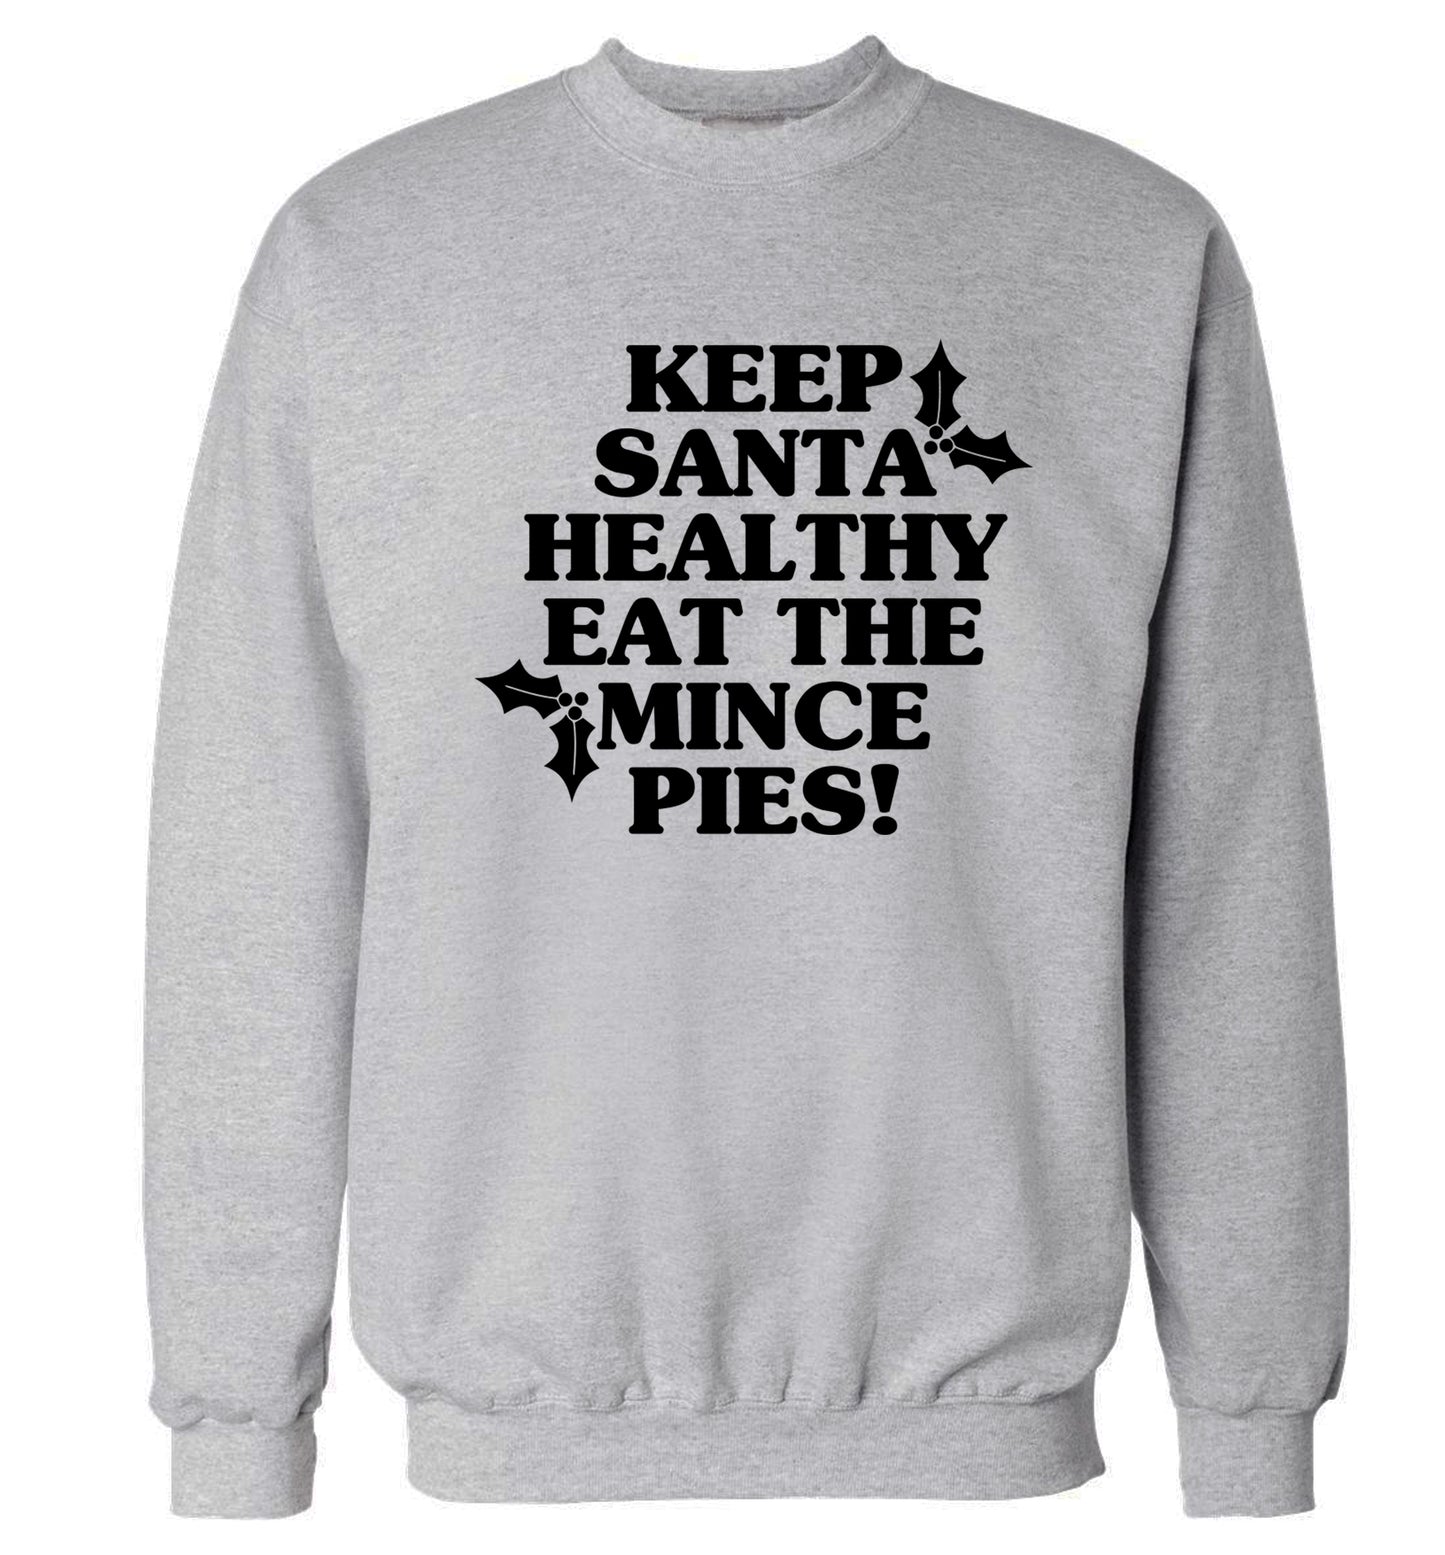 Keep santa healthy eat the mince pies Adult's unisex grey Sweater 2XL